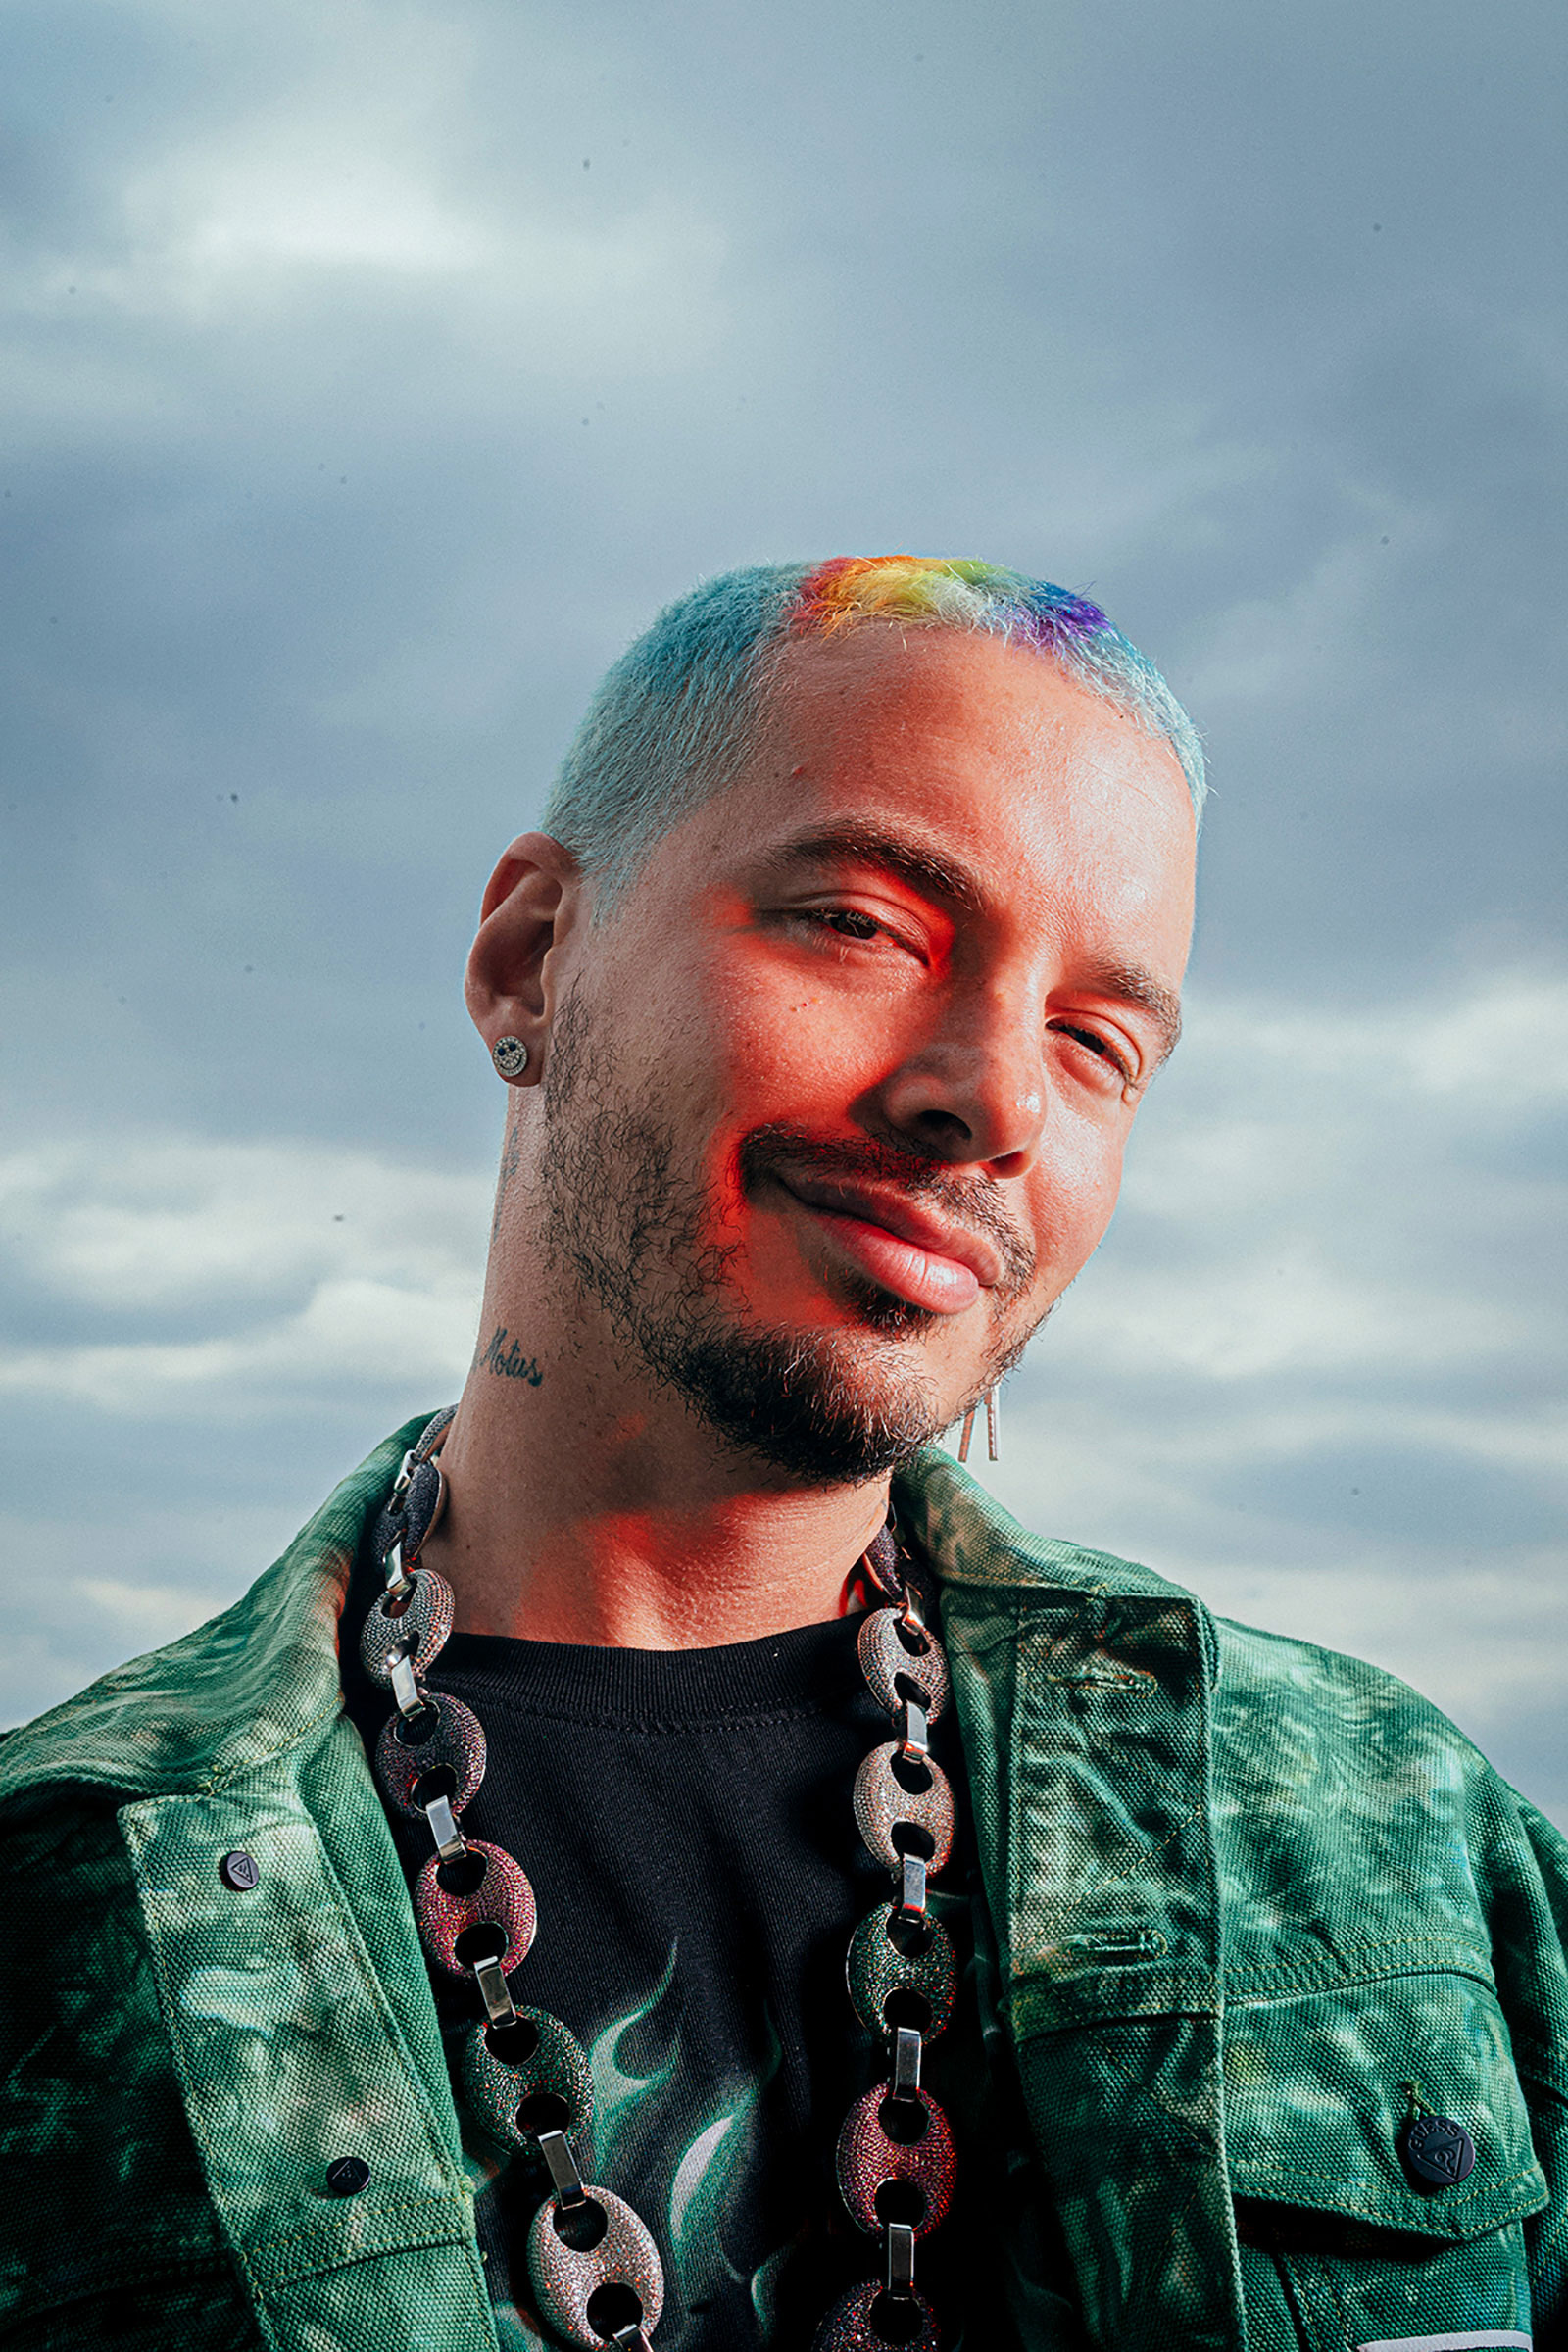 J Balvin Is on the 2020 TIME 100 List | TIME